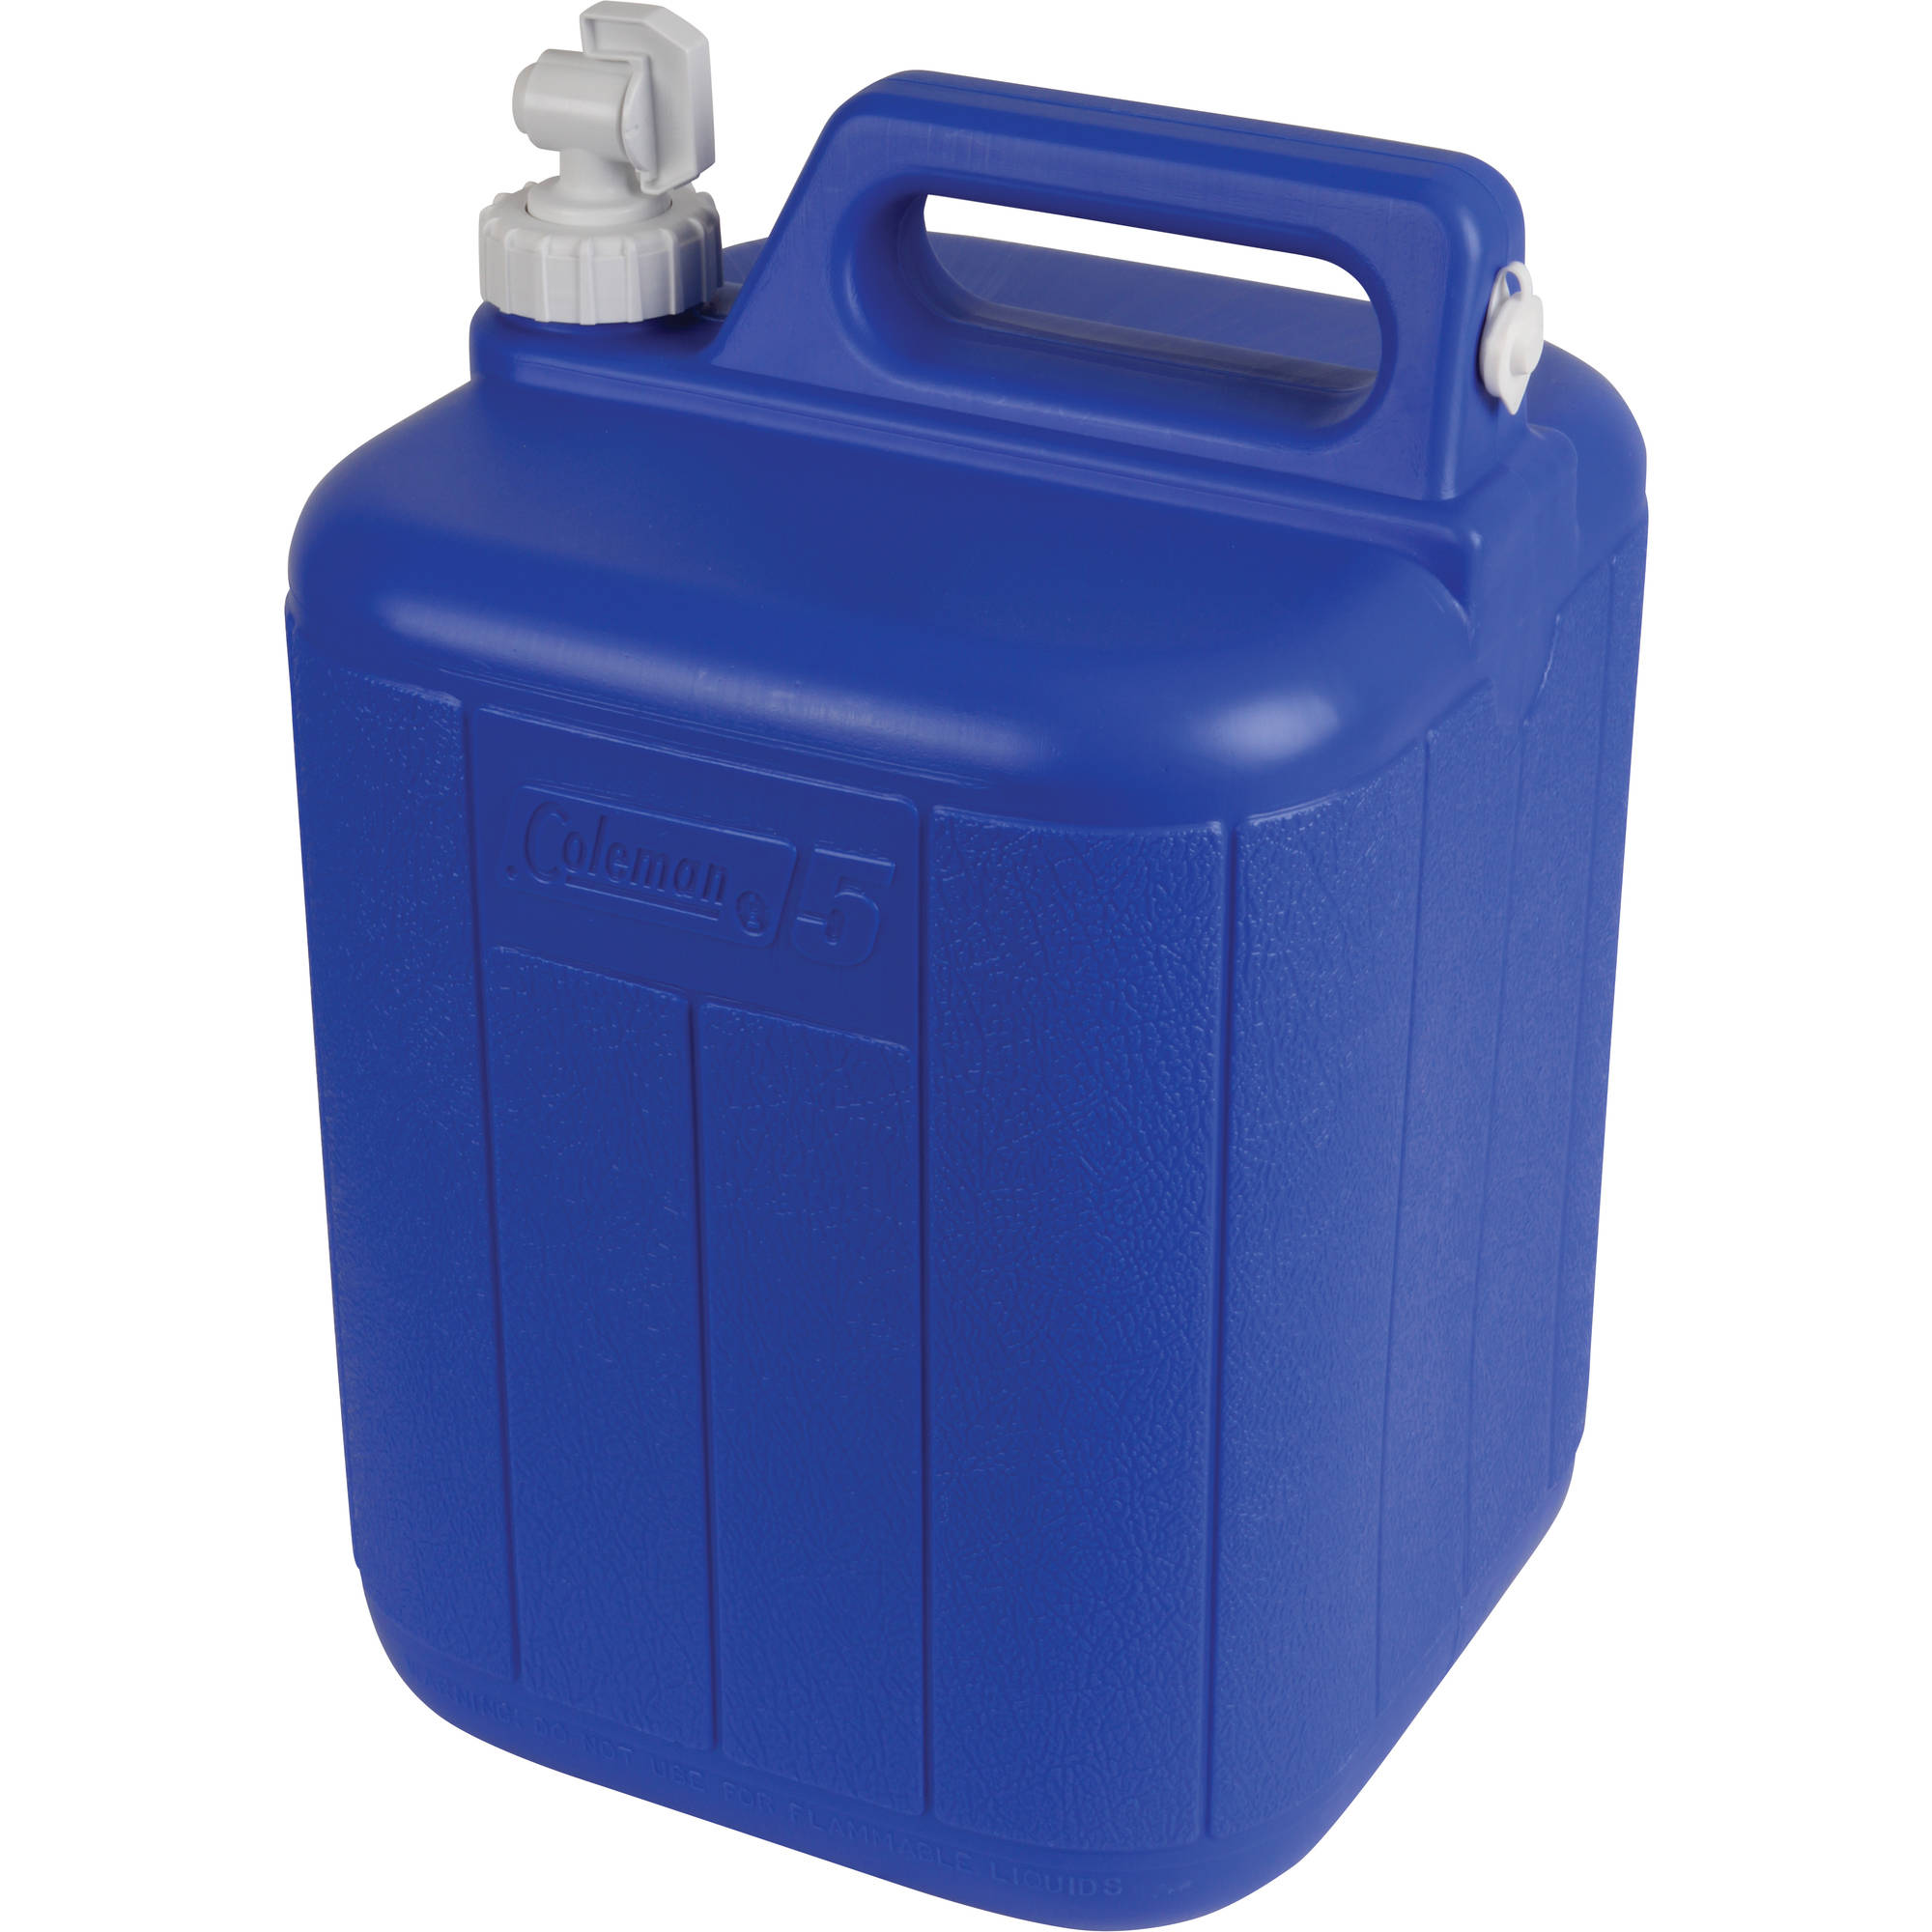 Coleman 5-Gallon Water Carrier, Blue - image 5 of 5